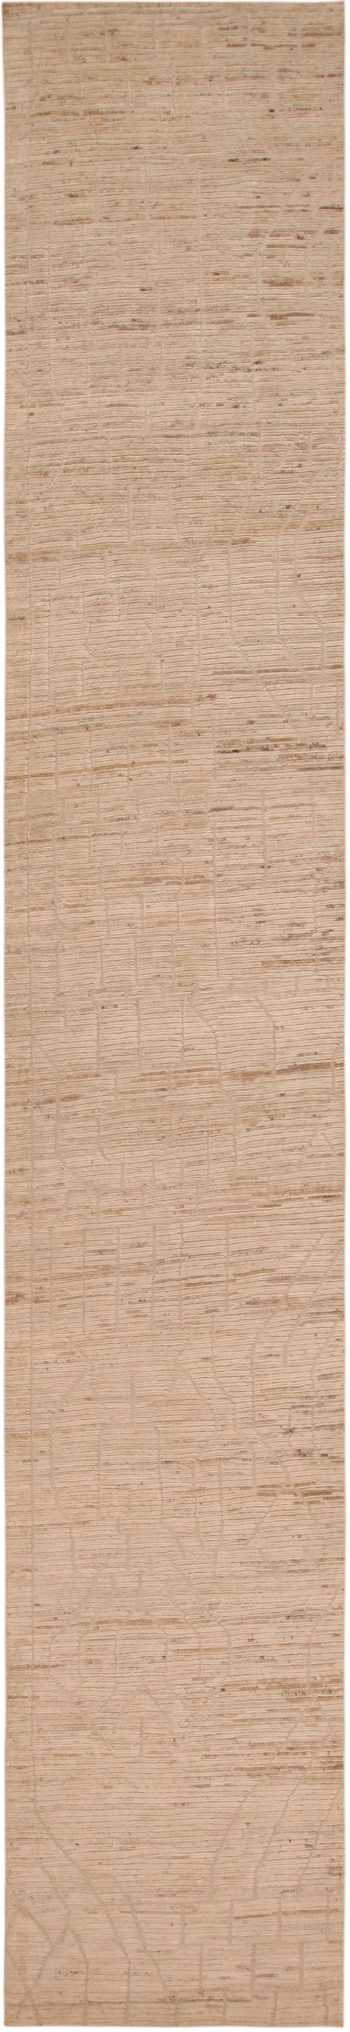 Cream Color Modern Moroccan Design Runner 61060 by Nazmiyal Antique Rugs